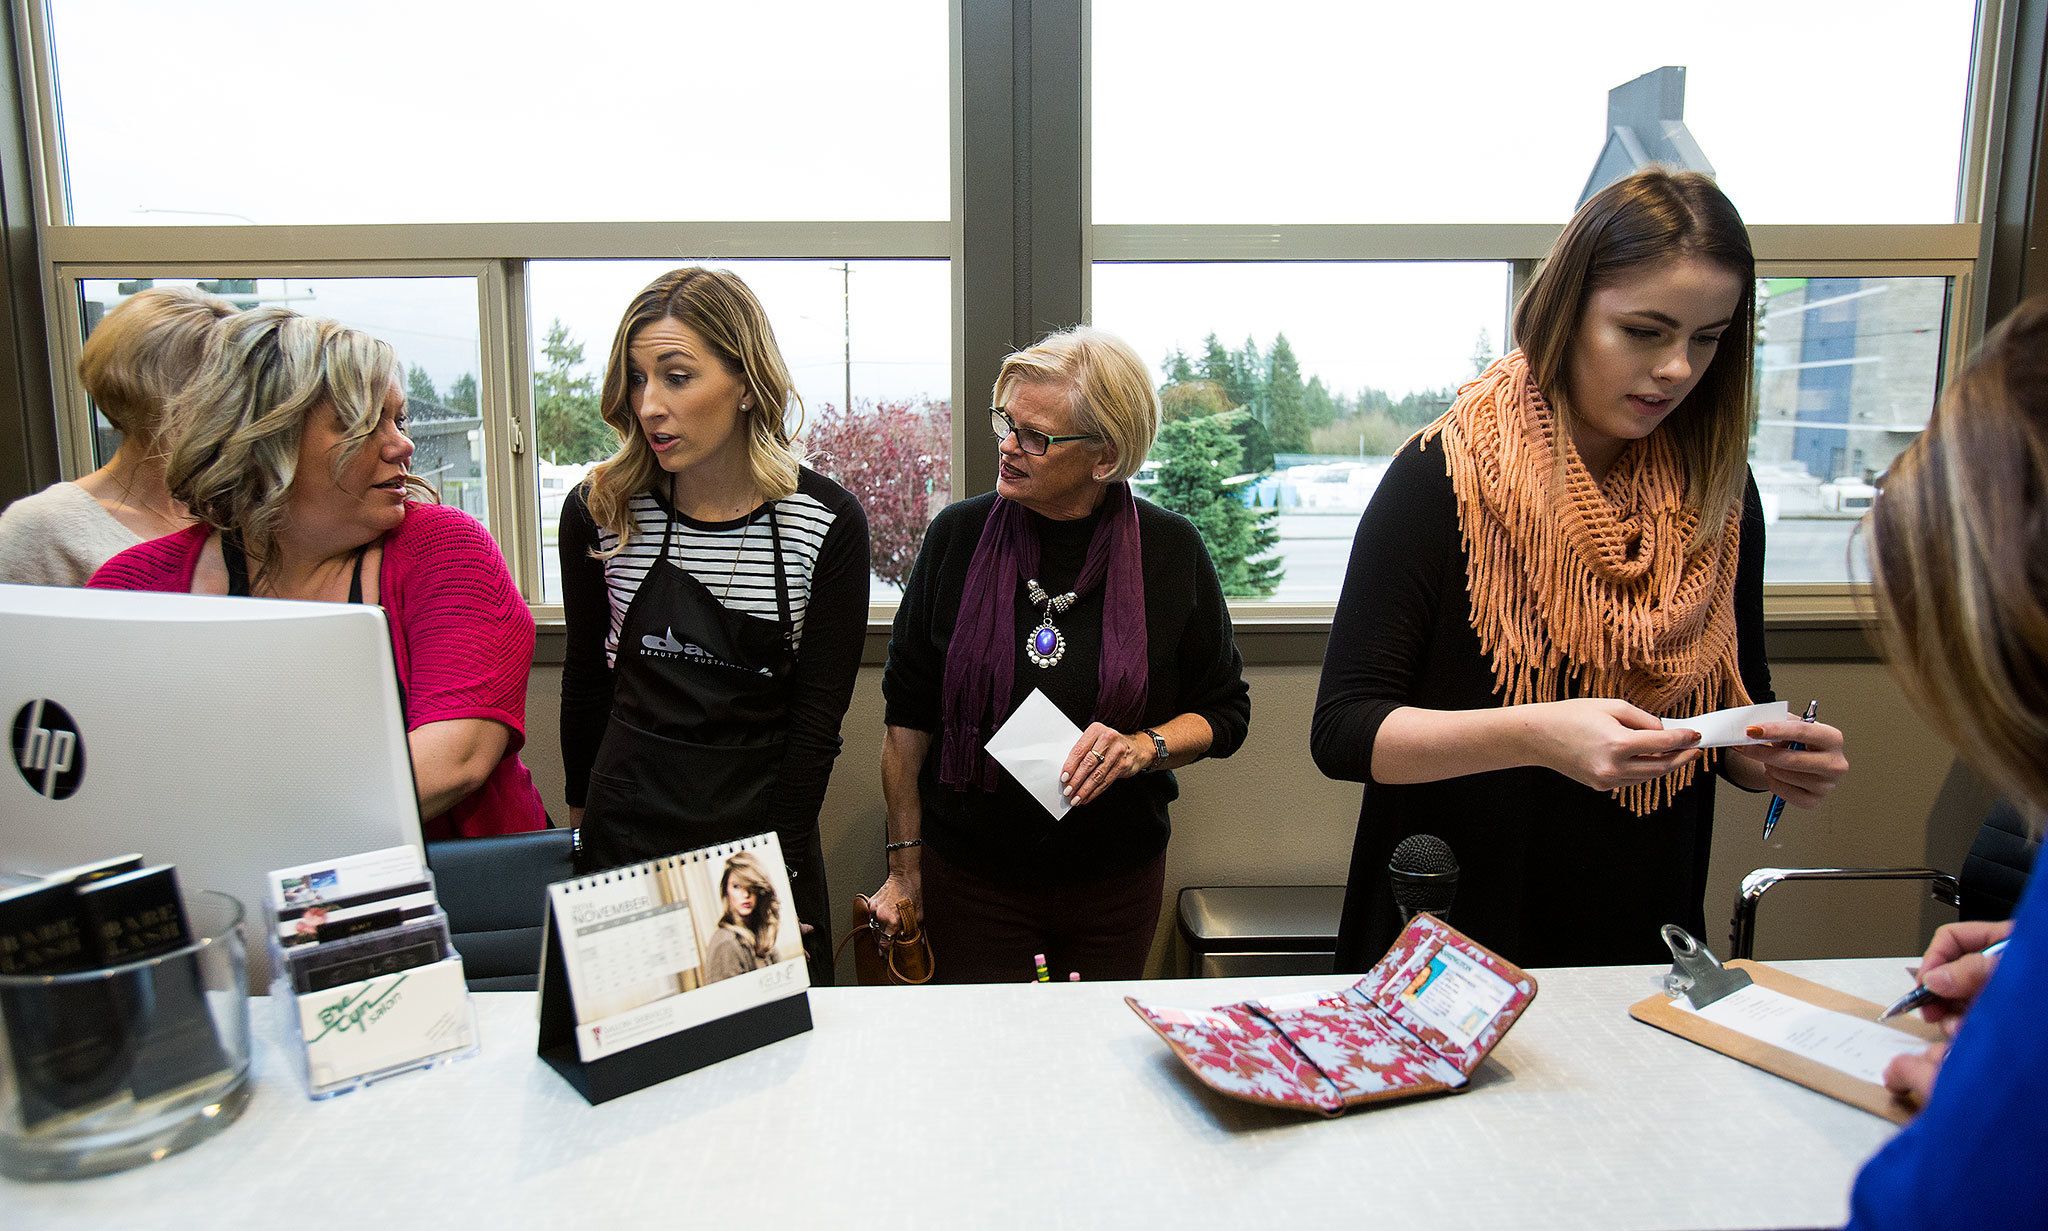 Cyndi Mitchell turned over her salon to 29-year-old Emily Douglas (the two in the center) after realizing she no longer had the energy to run BreCyn Salon. She gave the business to Douglas in stages and now works for Douglas twice a week. (Andy Bronson / The Herald)